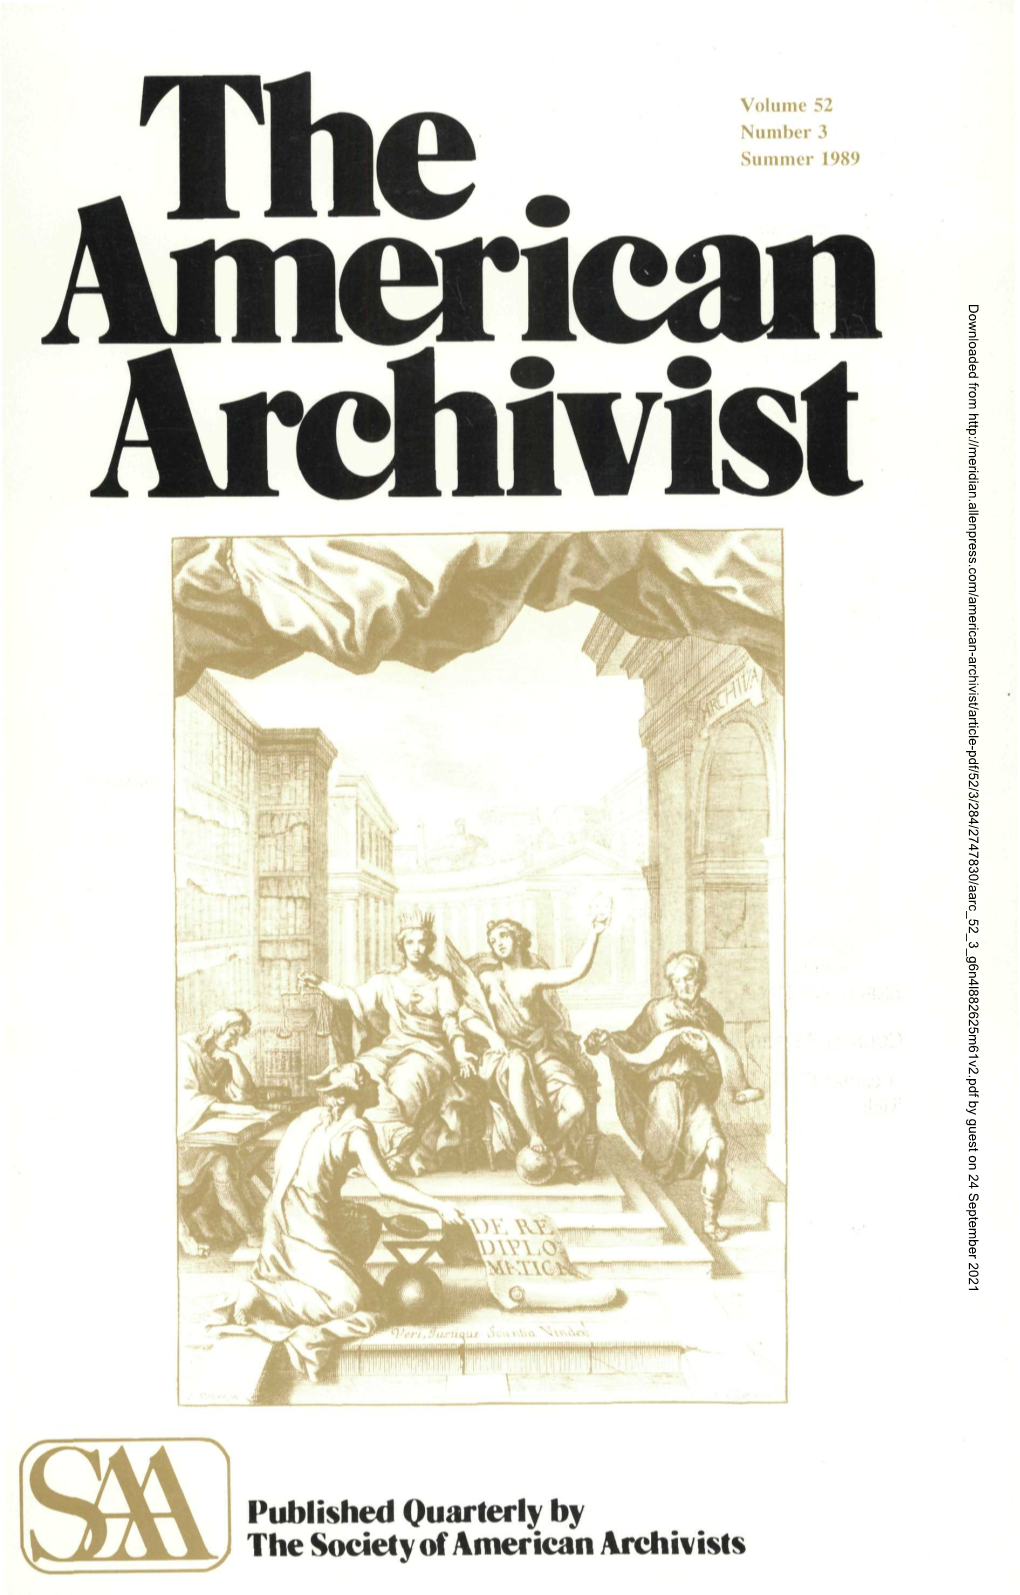 Published Quarterly by the Society of American Archivists the American Archivist